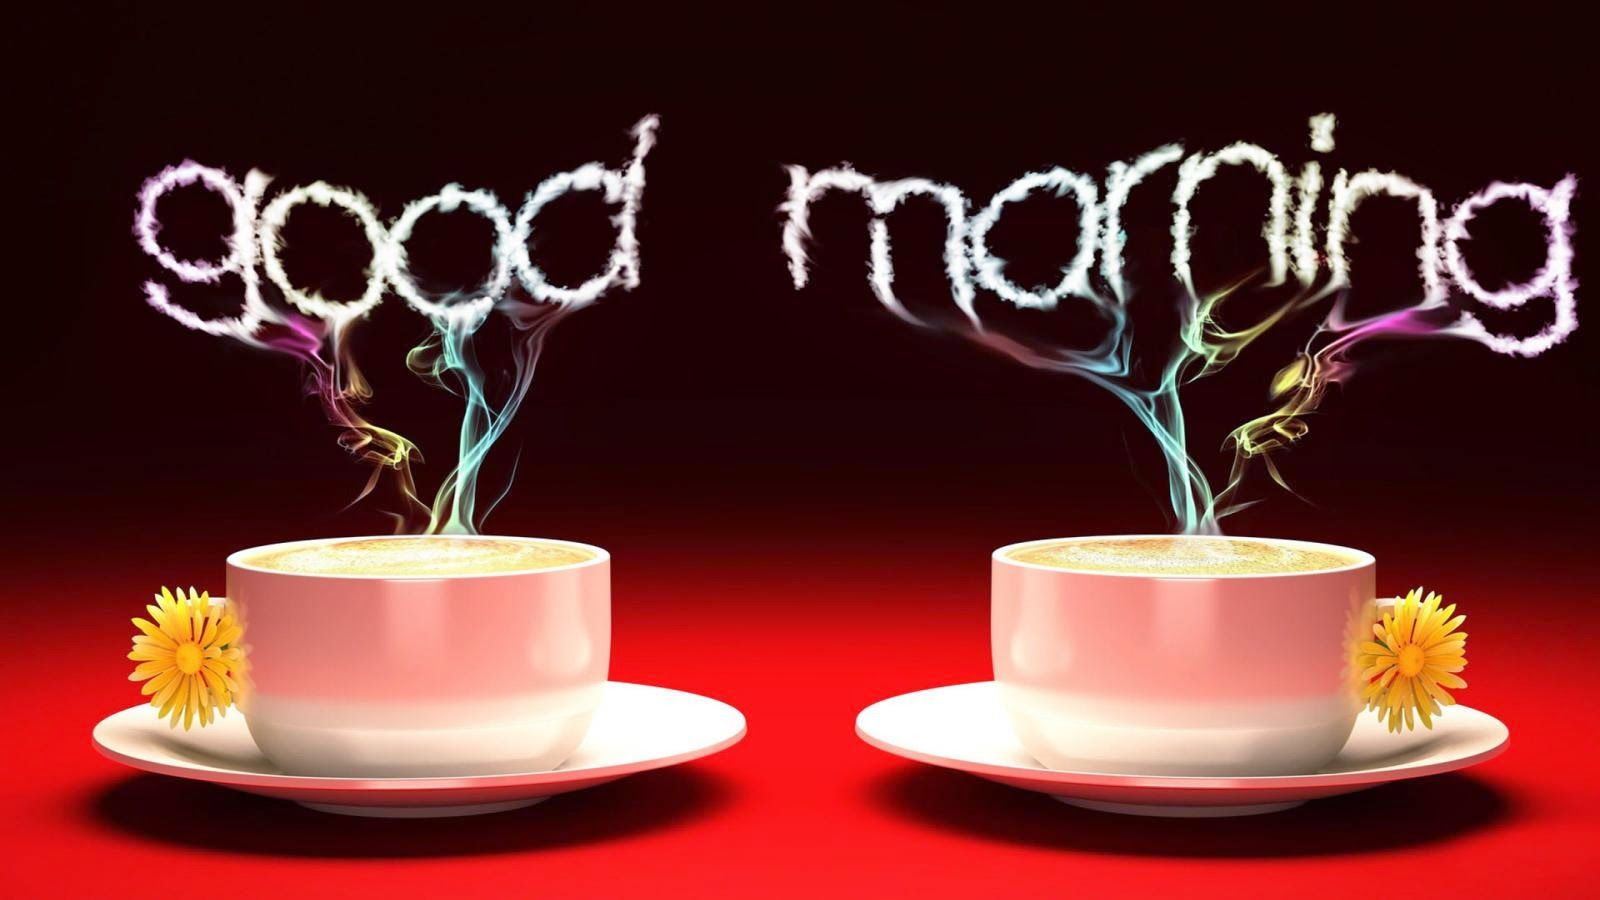 Good Morning HD Wallpaper Downloadto5animations.com Wallpaper, Gifs, Background, Image